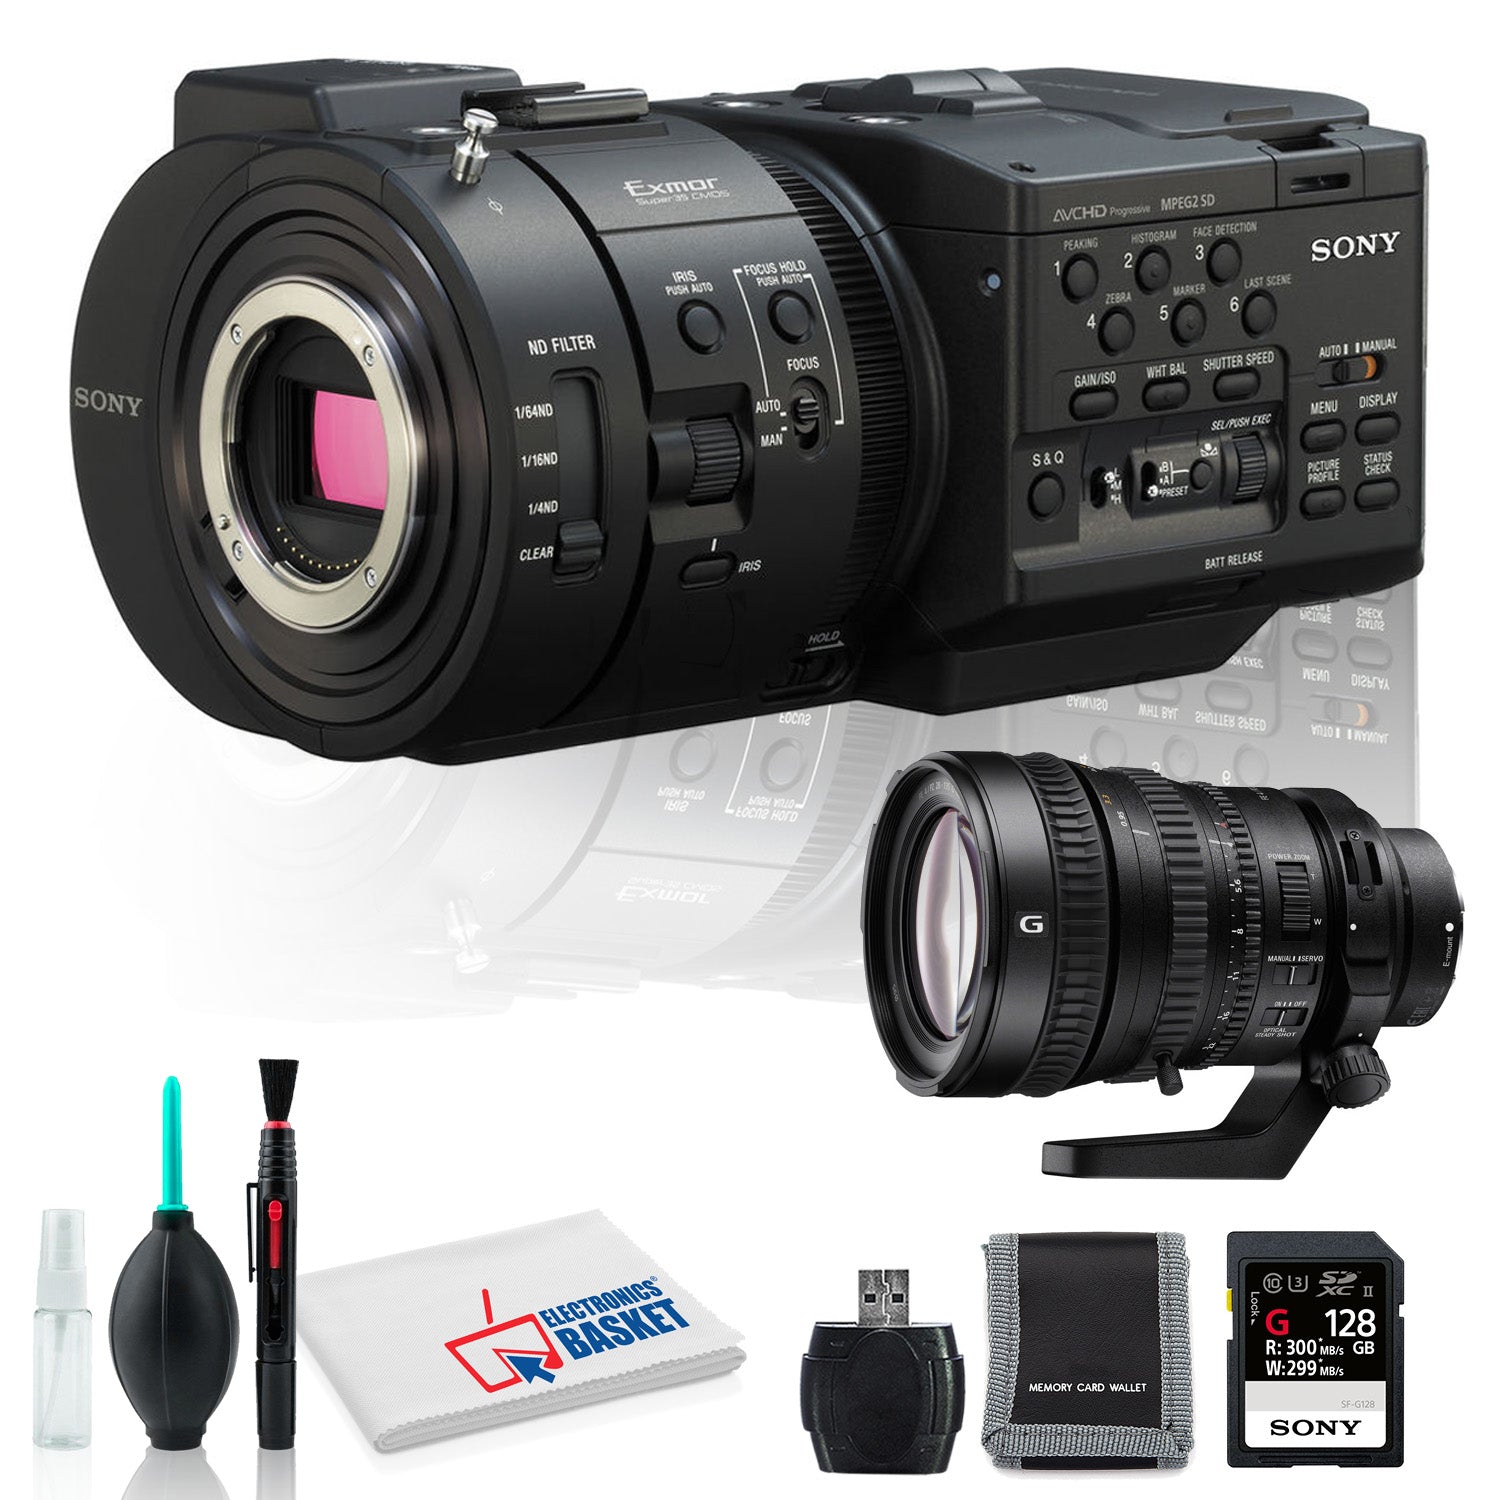 Sony NEX-FS700R Camcorder with Microfiber Cloth, Lens Cleaning Kit, 128GB Memory Kit, and Sony PZ 28-135mm f/4 G OSS Lens